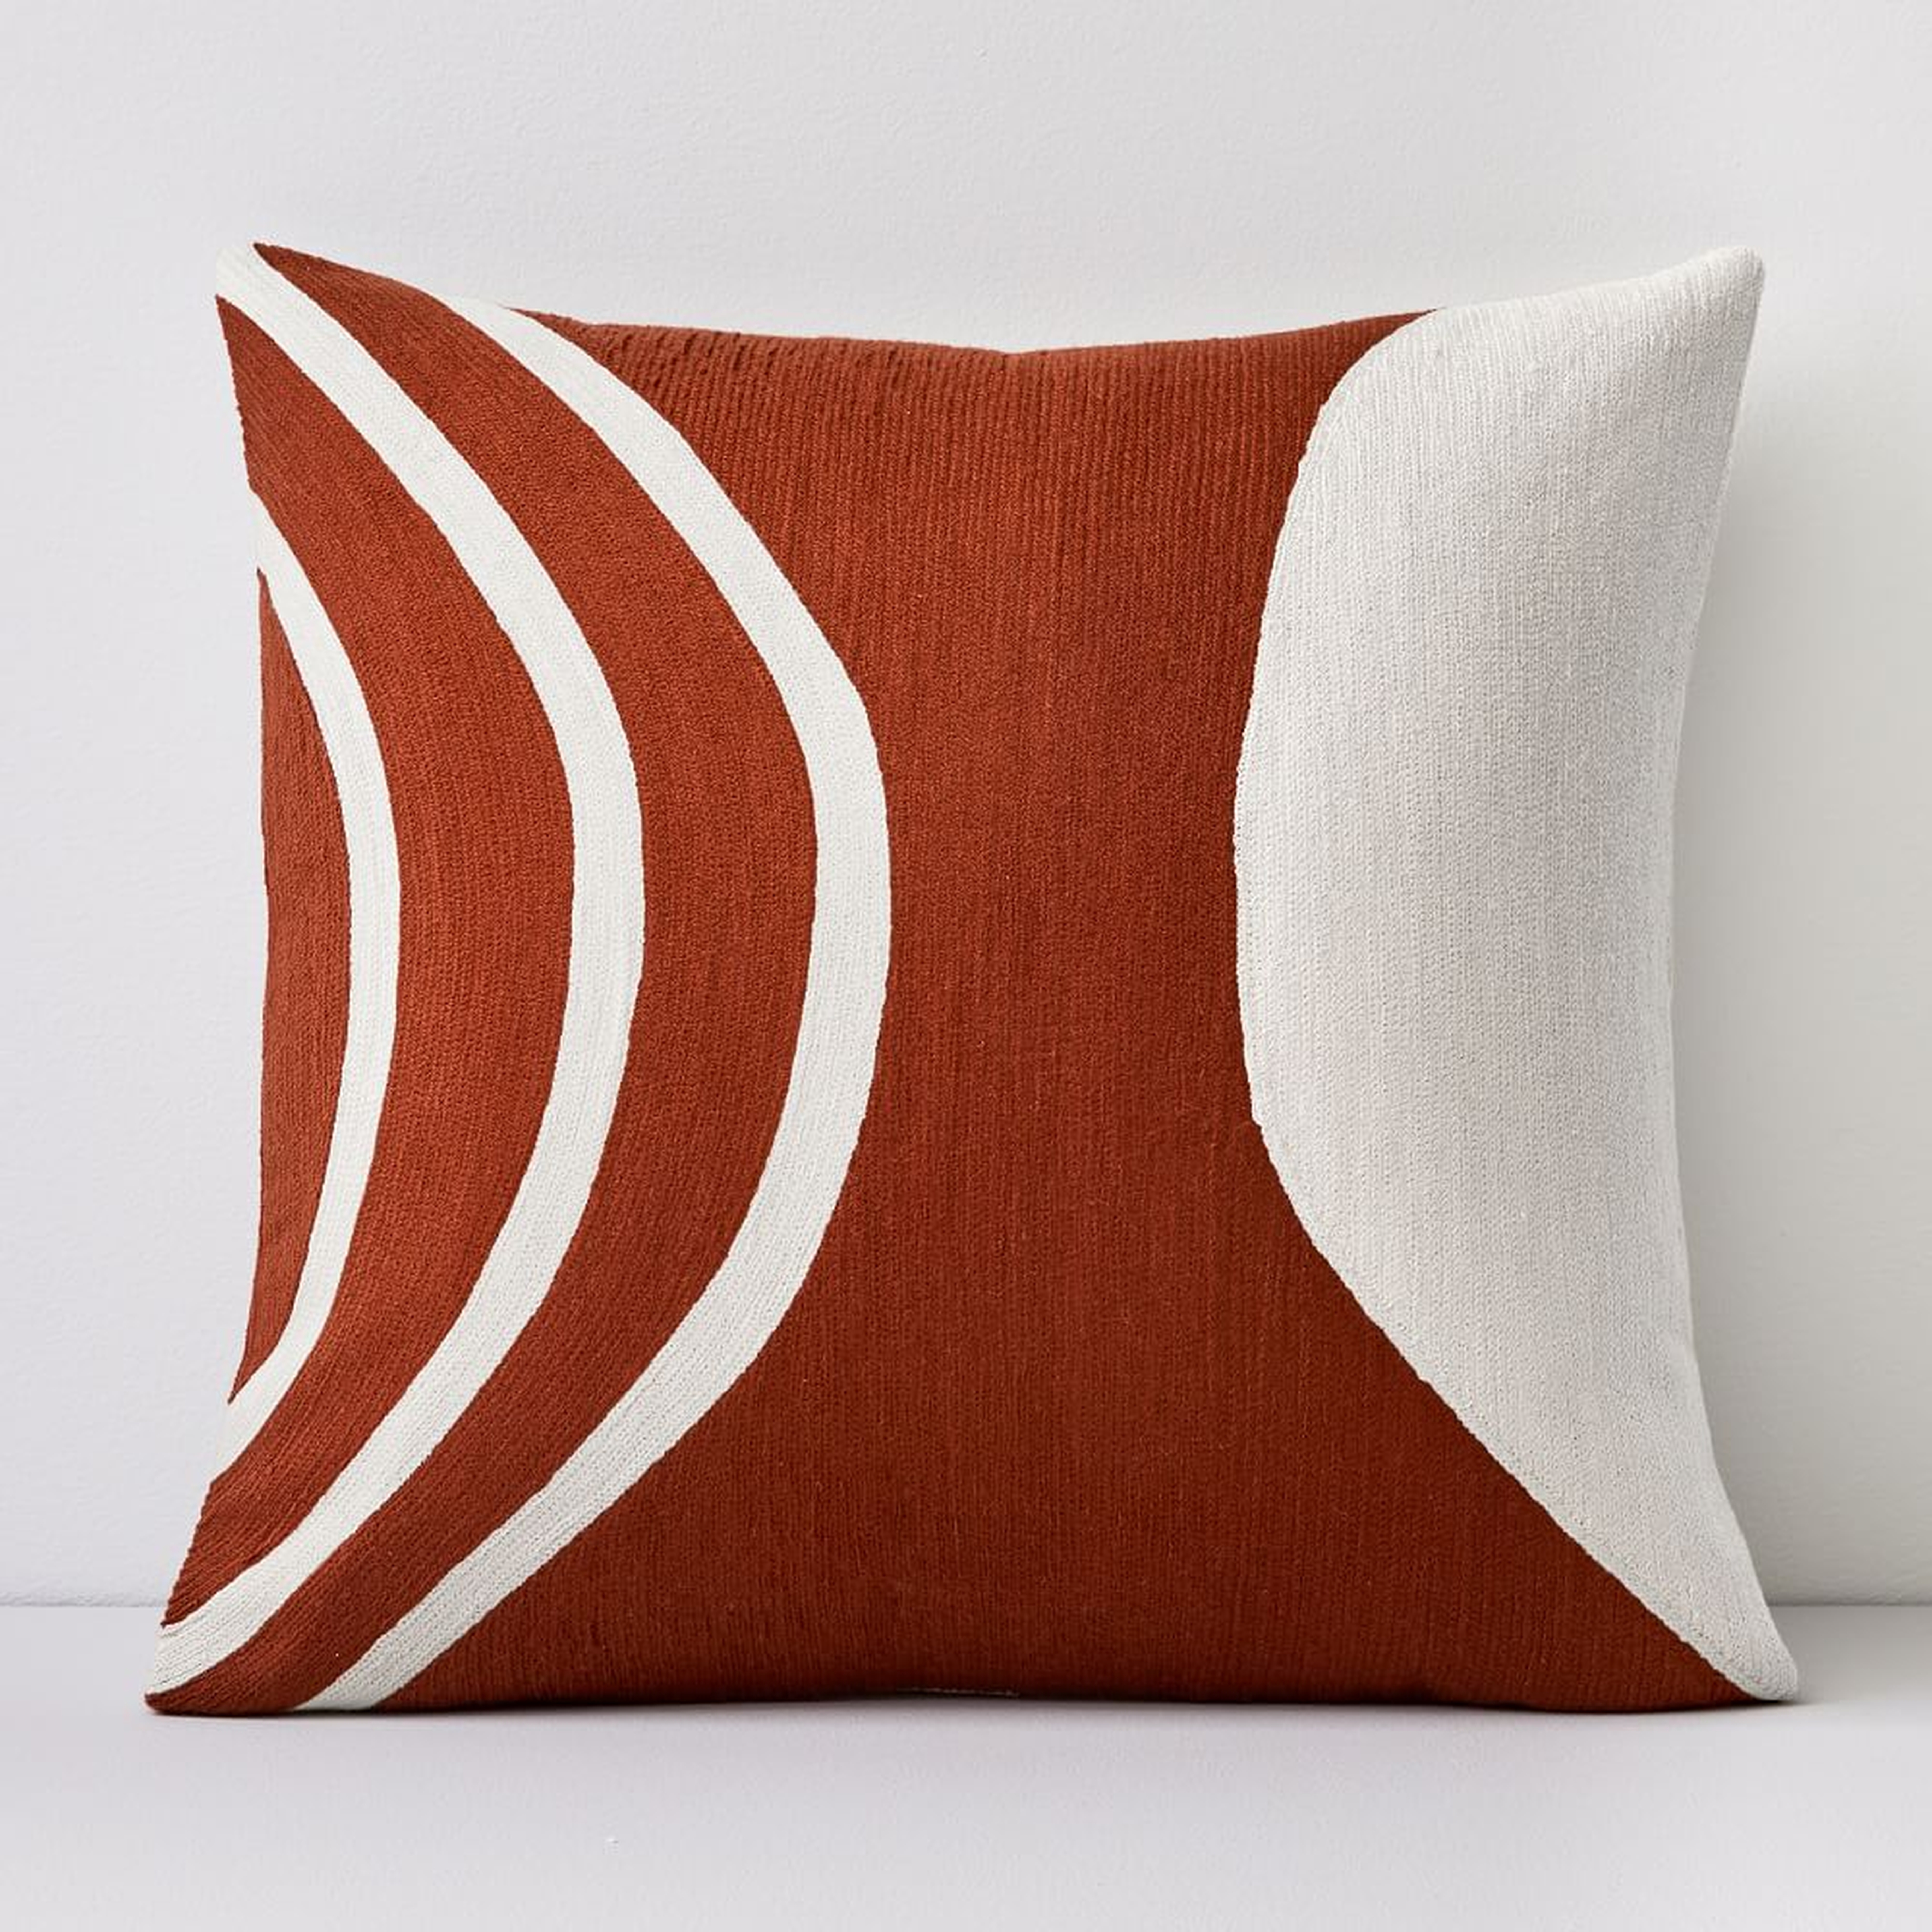 Crewel Rounded Pillow Cover, Copper, 20"x20" - West Elm